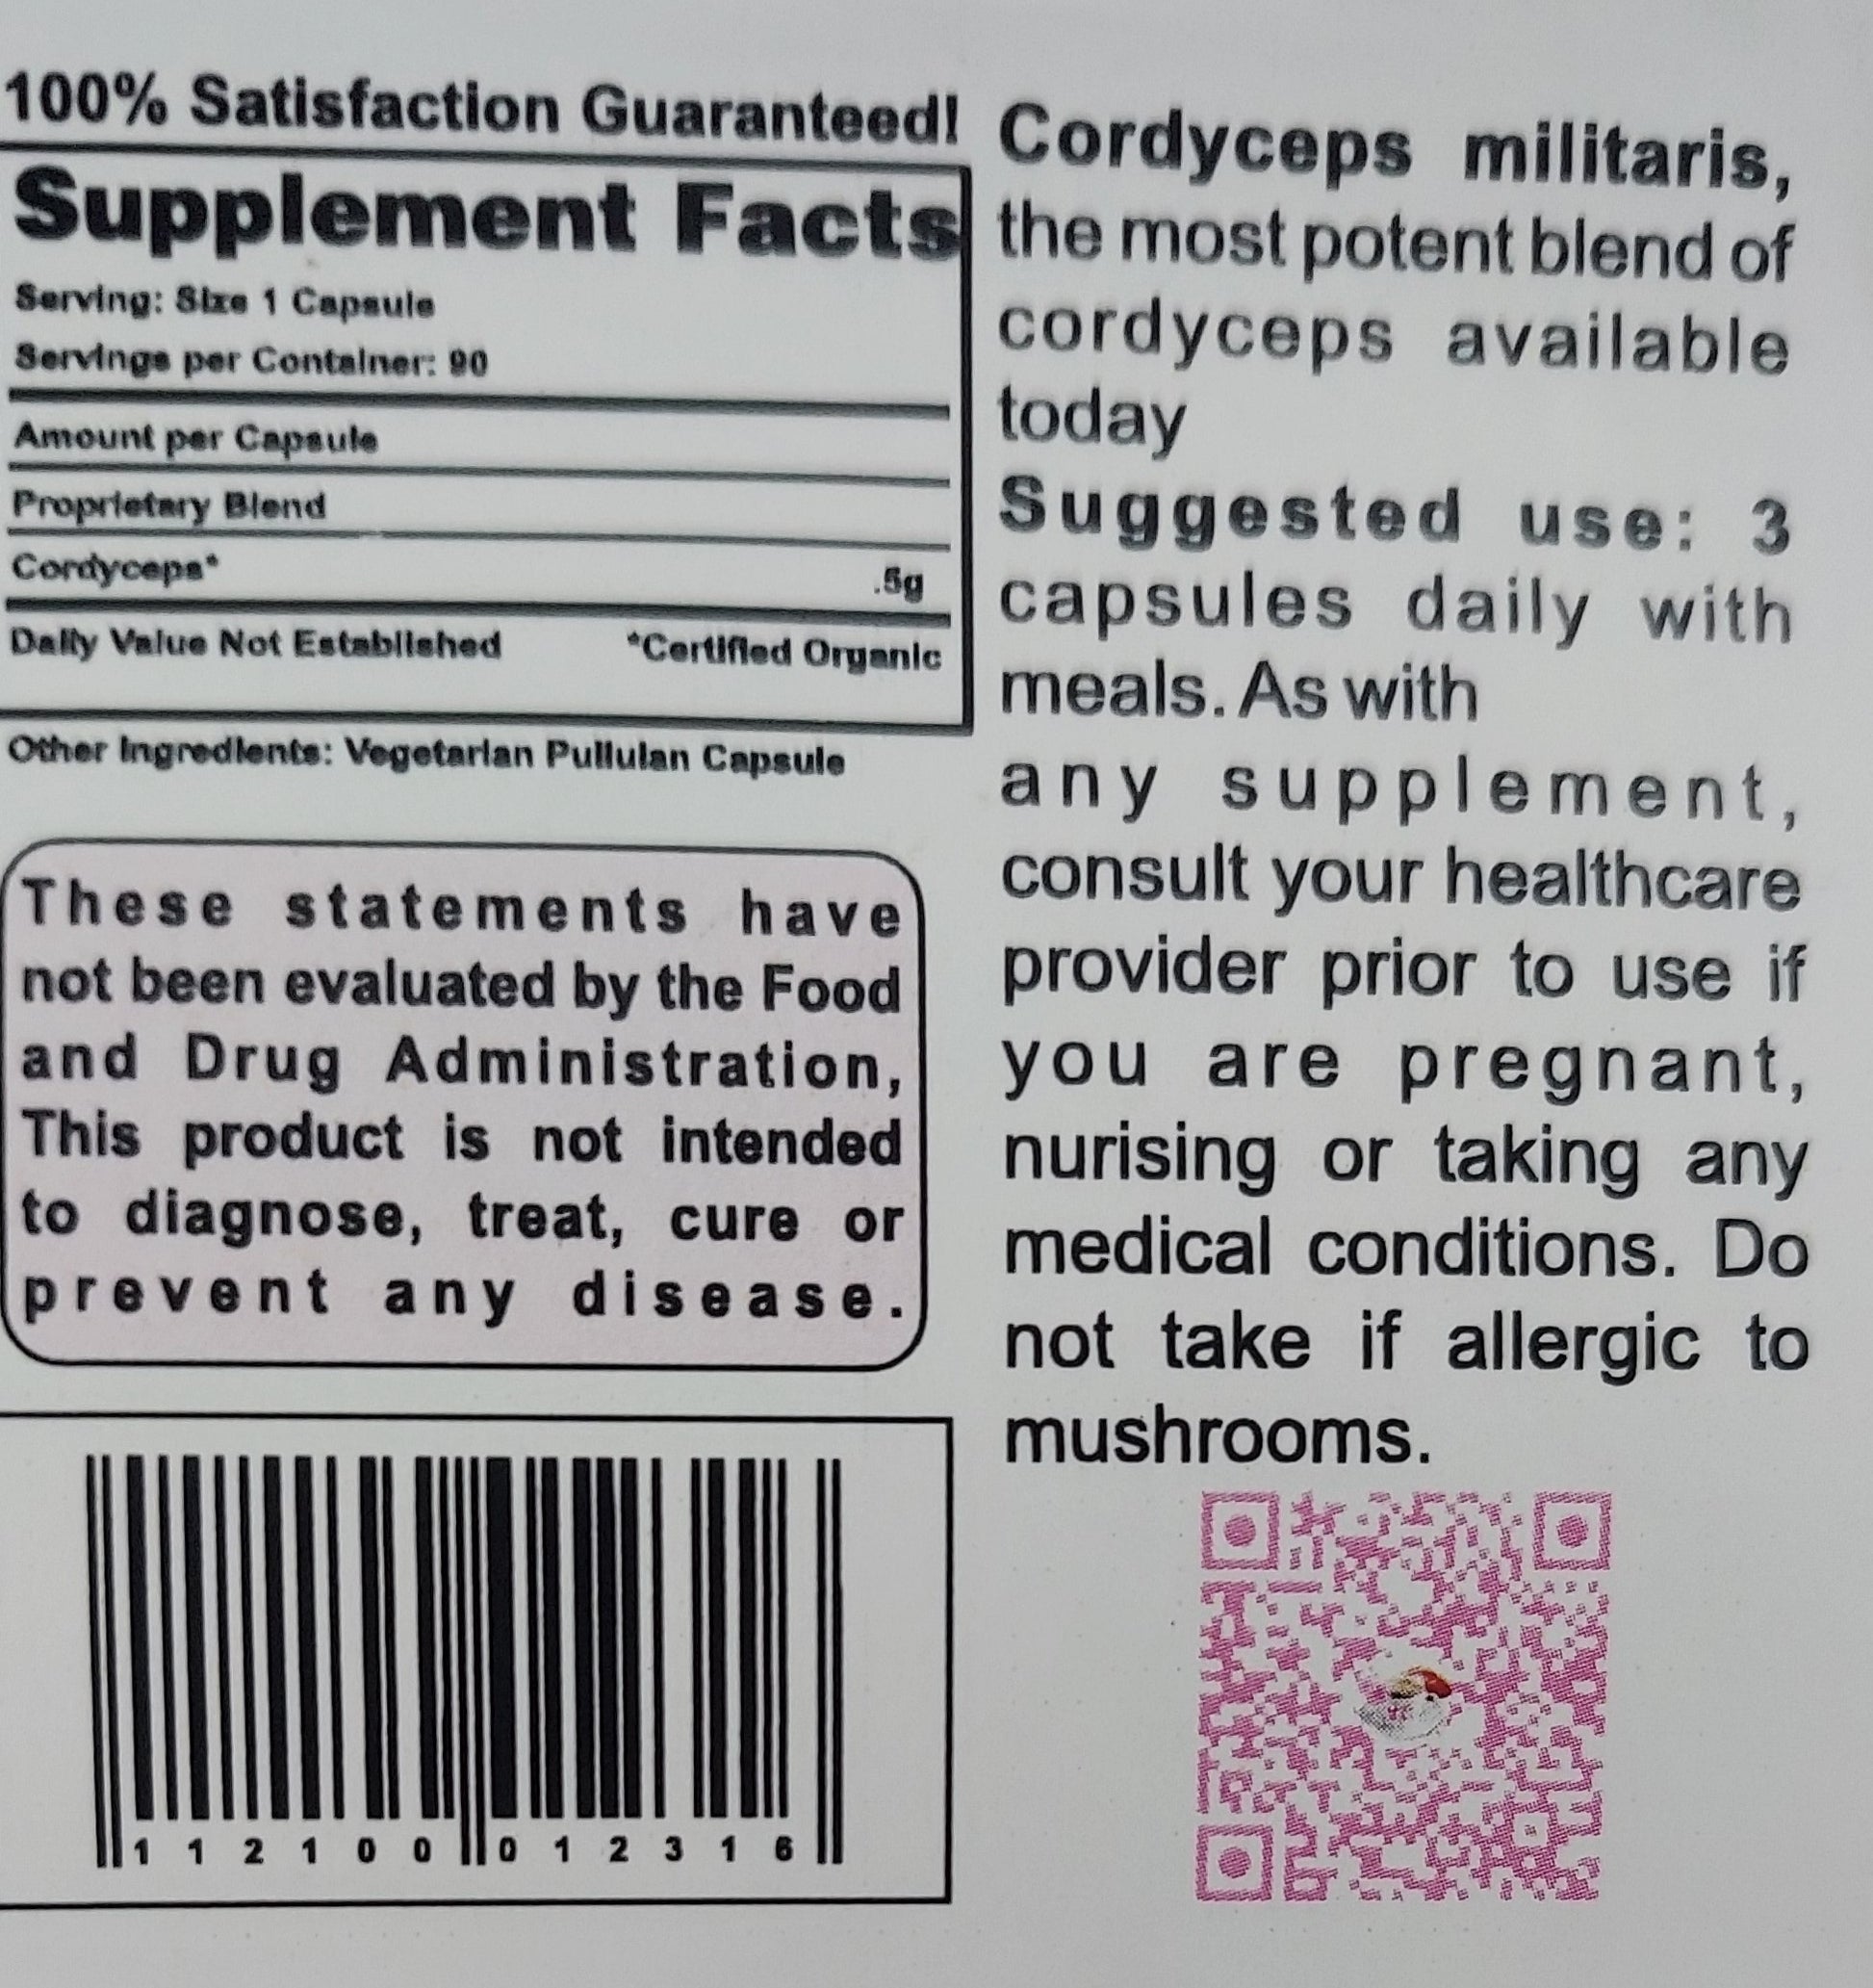 Photo of the rear label of Ma' Cline's Cordy2~Max a dietary supplement. Cordyceps Mushroom Blend 90 capsules 500 mg each. www.maclinescoffee.com, Carson City, NV 89701, 949-371-6085,  Suggested use, 3 capsules per day